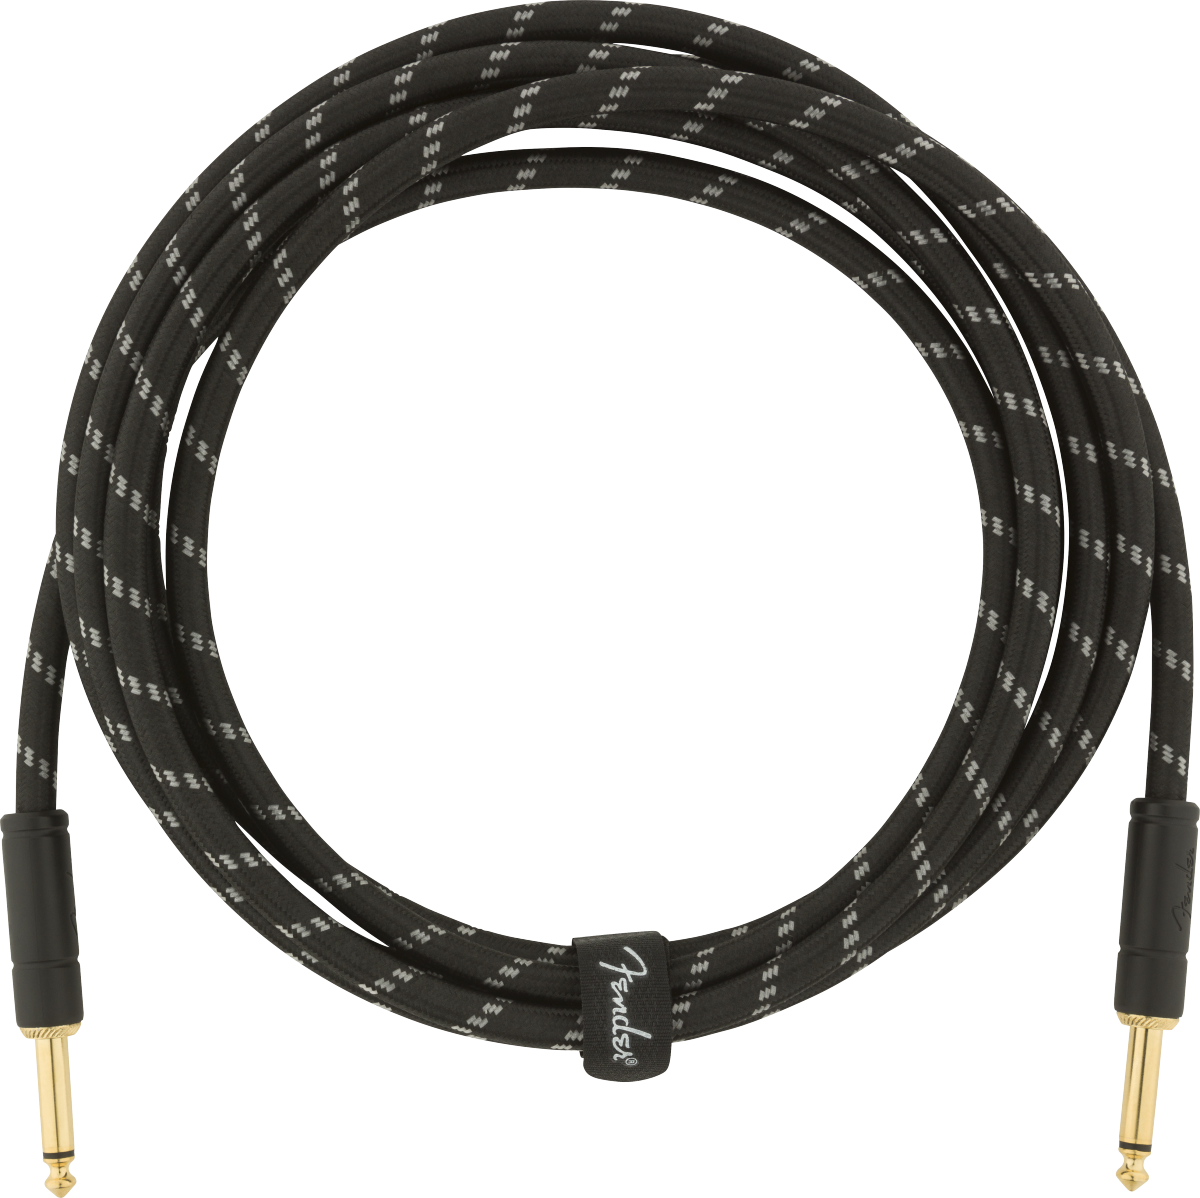 Fender® Deluxe Series Instrument Cable, Straight/Straight, 10', Black Tweed